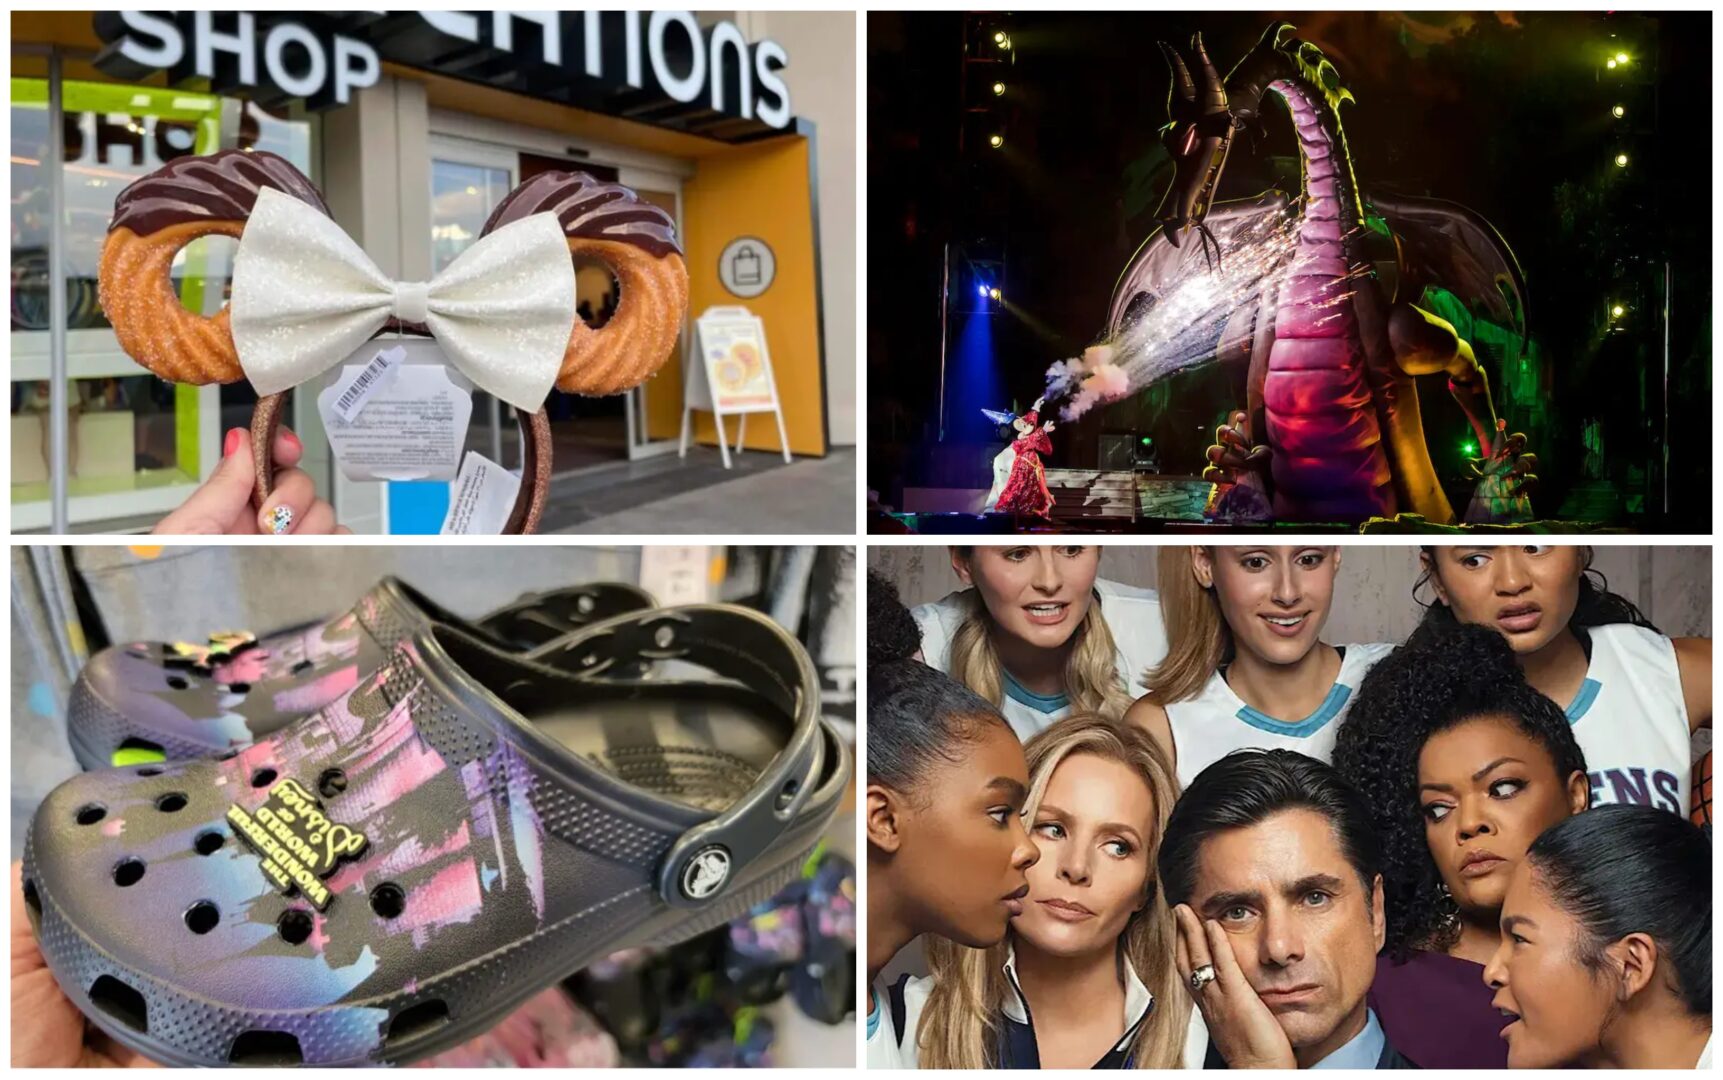 Disney News Highlights: Fantasmic Not Returning Until Labor Day, Disneyland 30-Year Plan, Wonderful World of Crocs, of Shows Being Removed From Disney + | Chip and Company